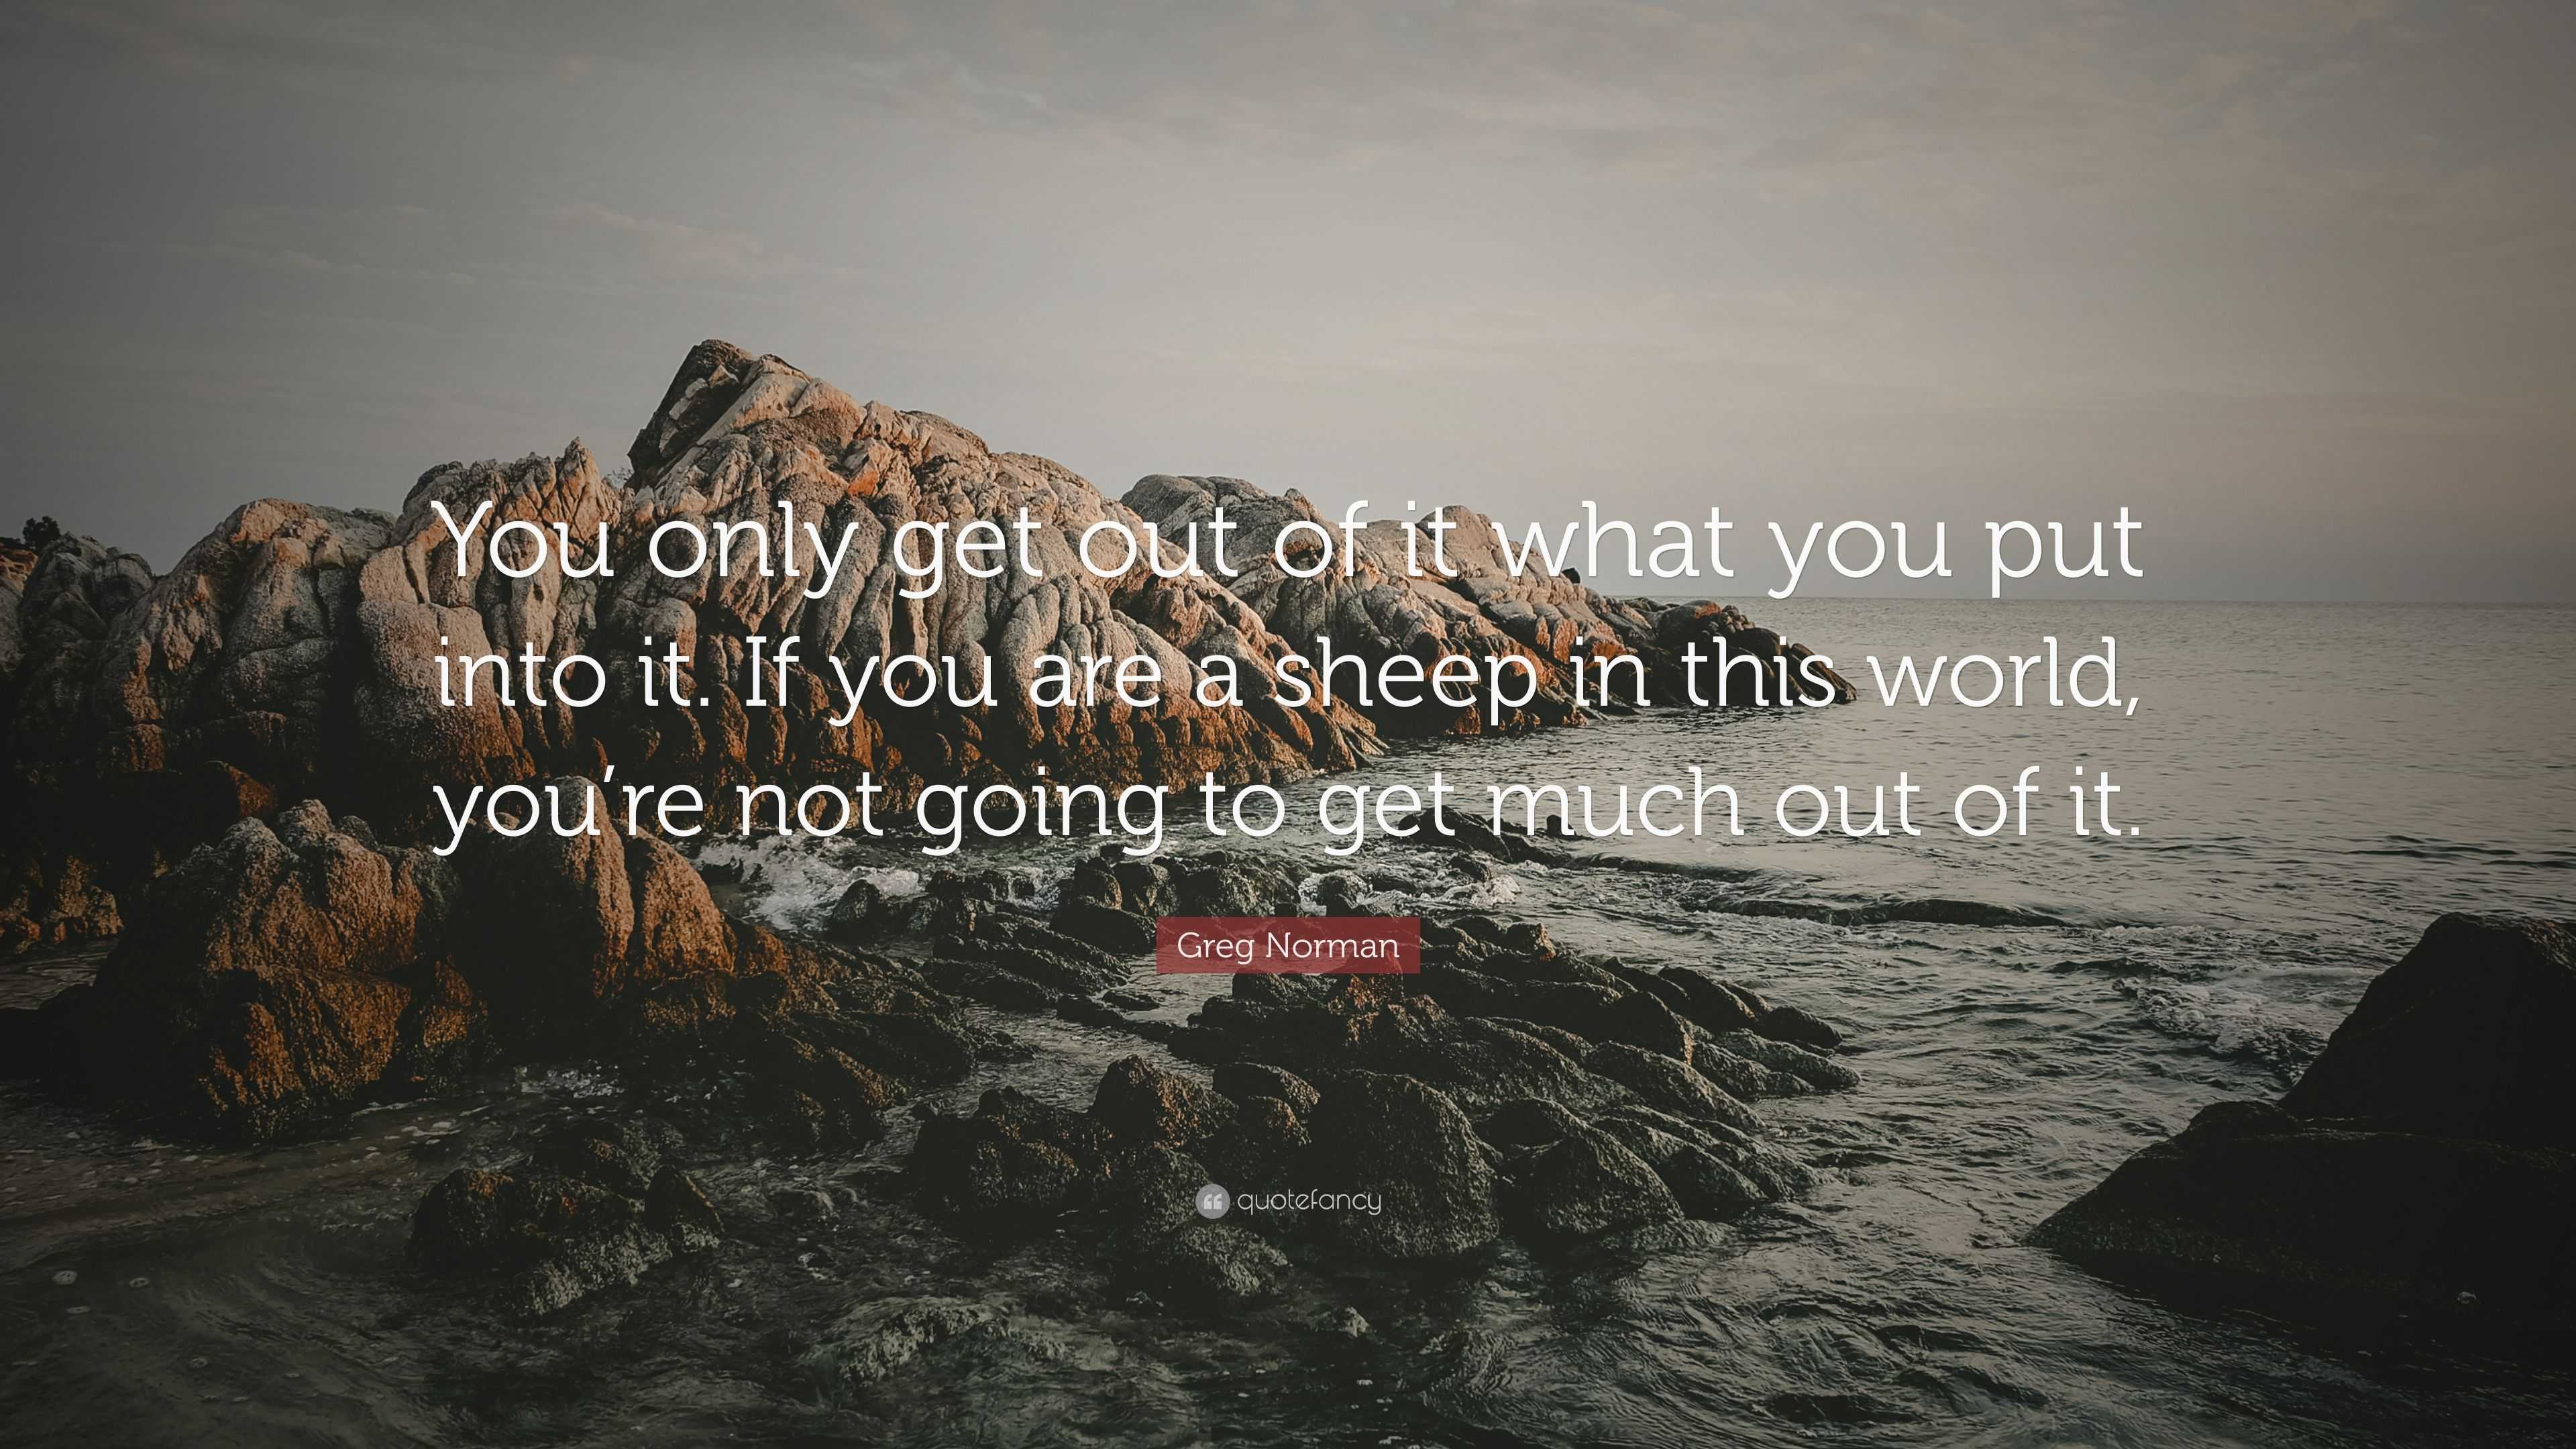 Greg Norman Quote You Only Get Out Of It What You Put Into It If You Are A Sheep In This World You Re Not Going To Get Much Out Of It 7